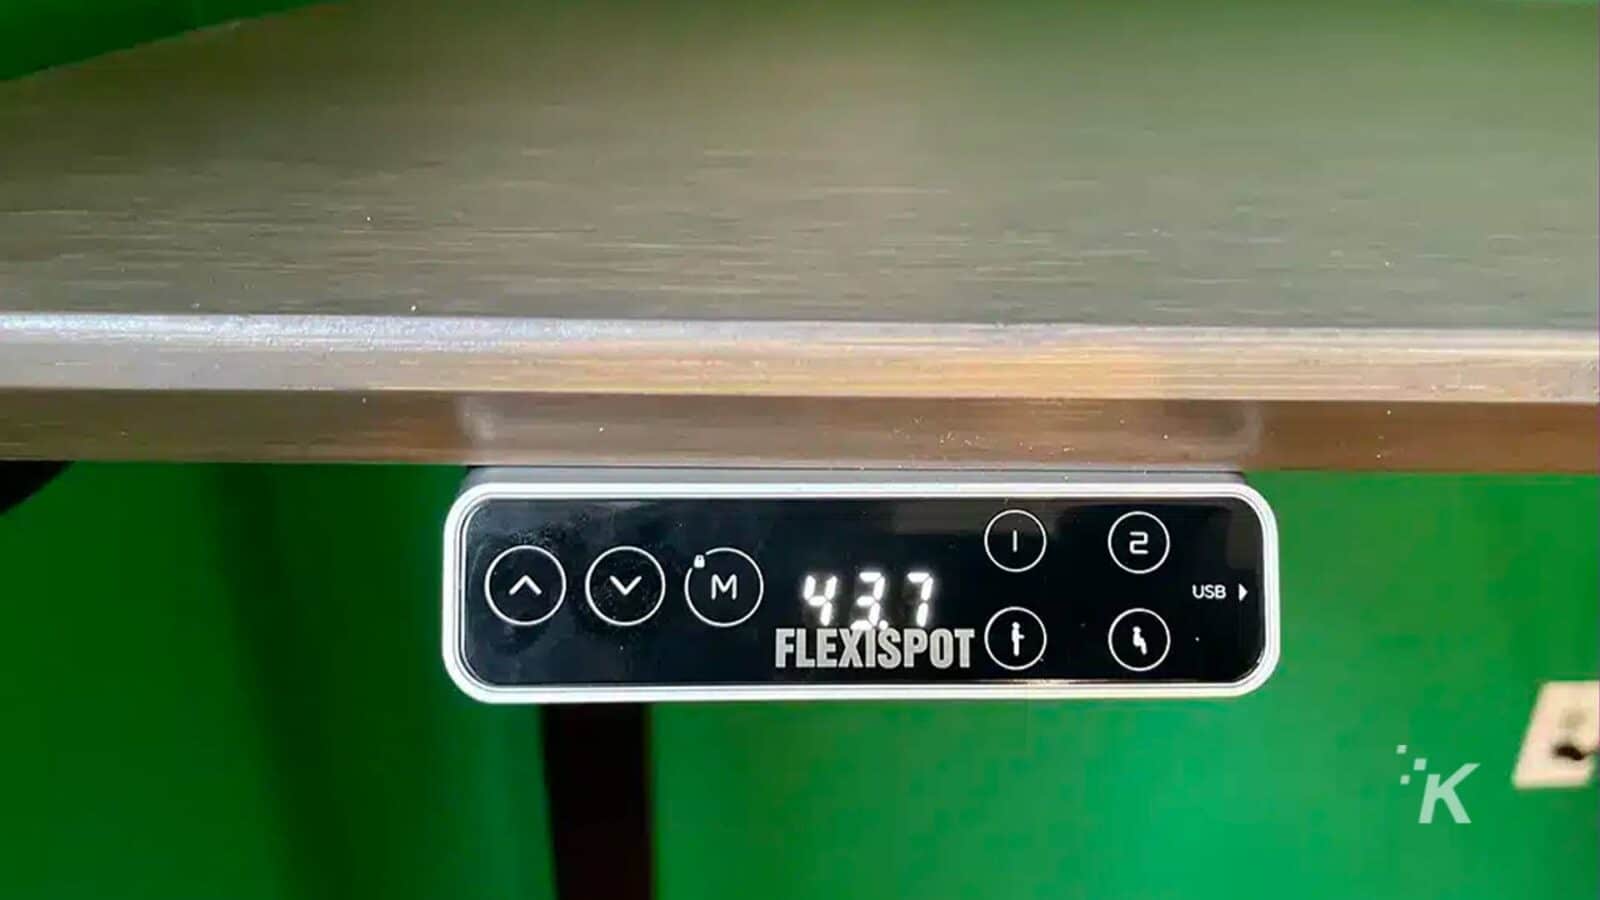 The image is showing a USB cable being connected to a FlexiSpot device. Full Text: - VM) 437 2 1 USB od FLEXISPOT K